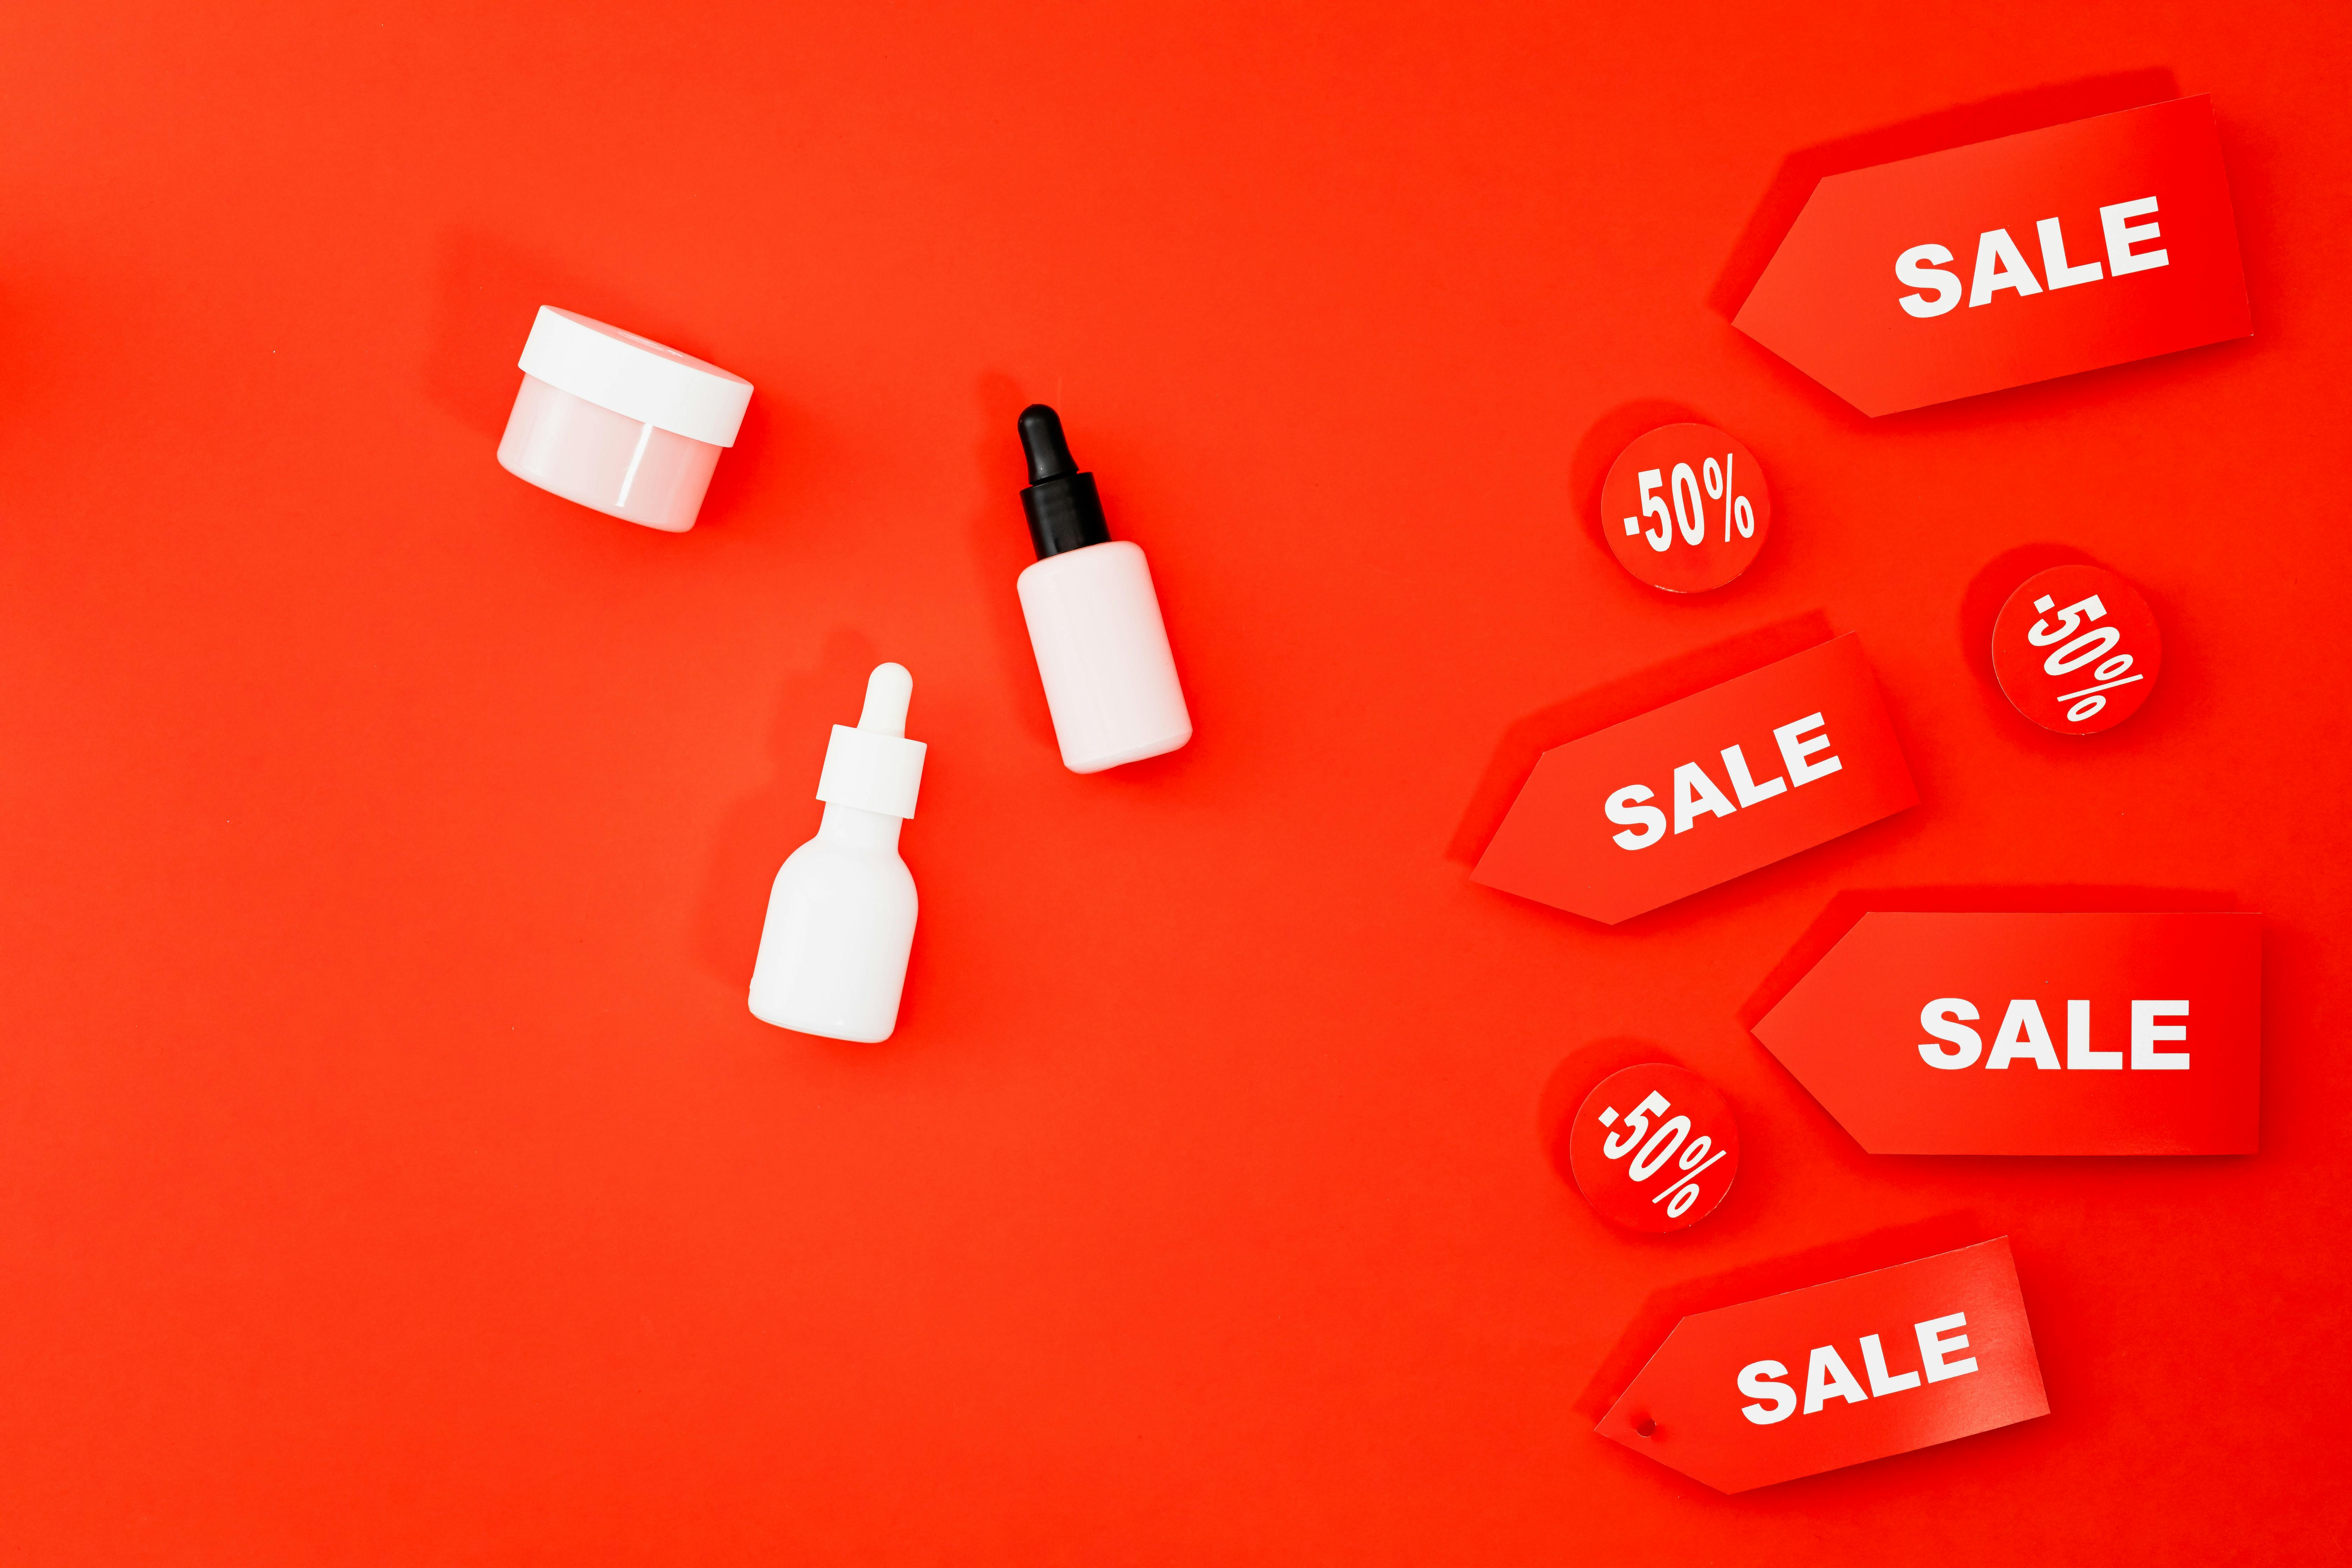 healthcare products at sale on red background